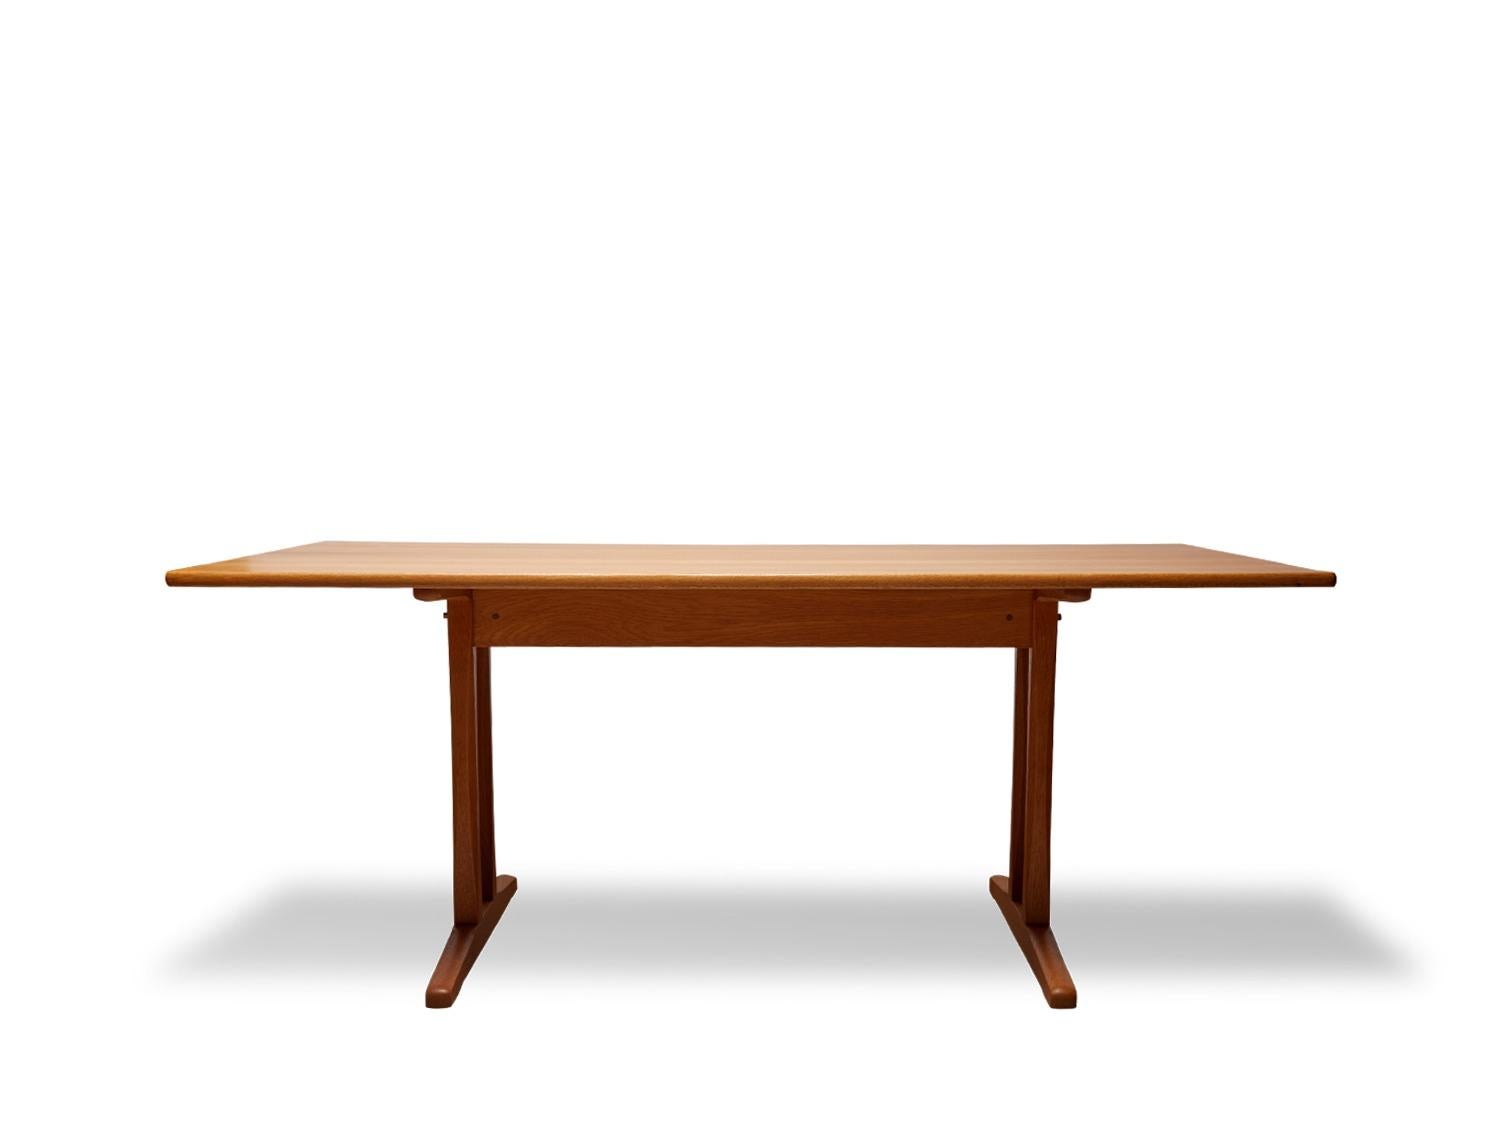 “Shaker”. Solid oak dining table. Made for FDB, with maker's stamp.
Artist: Børge Mogensen
Dimensions: 71 W x 35.5 D x 29 H.